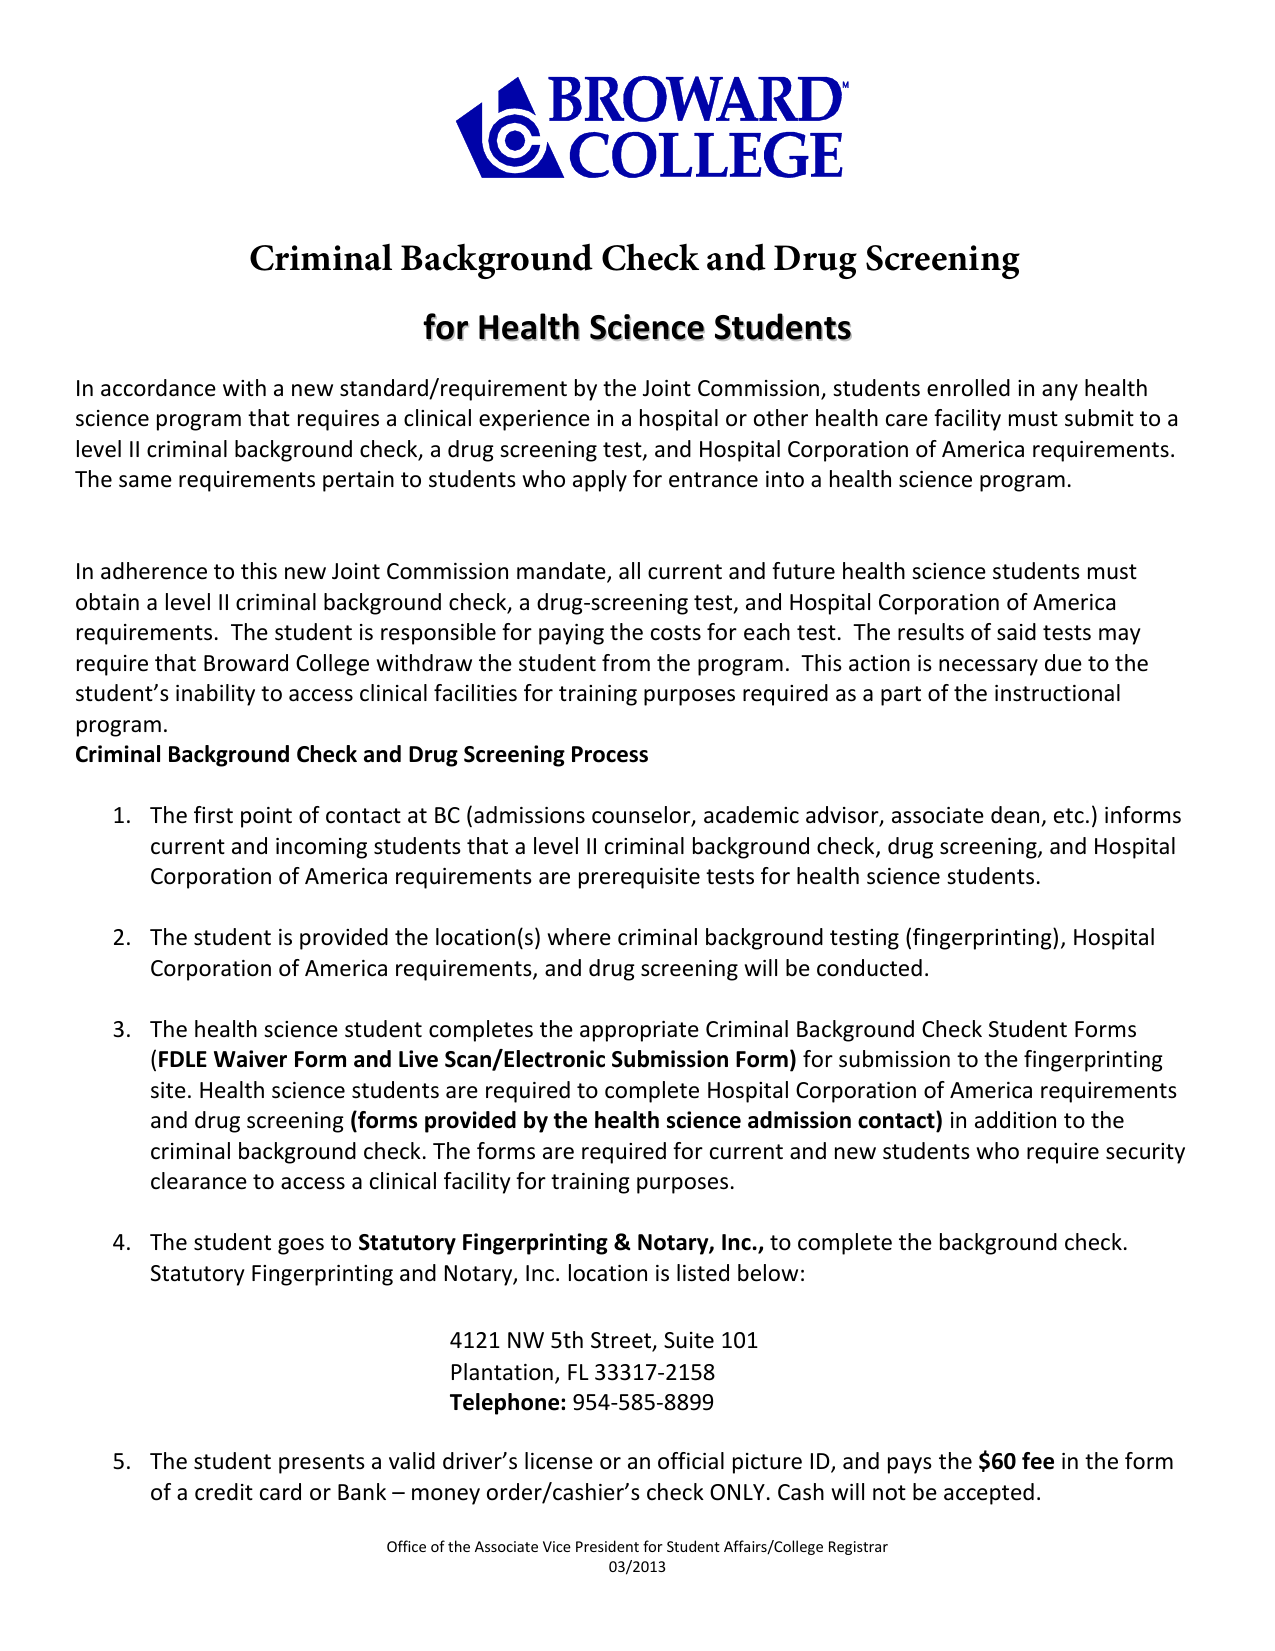 Background Check and Drug Screening